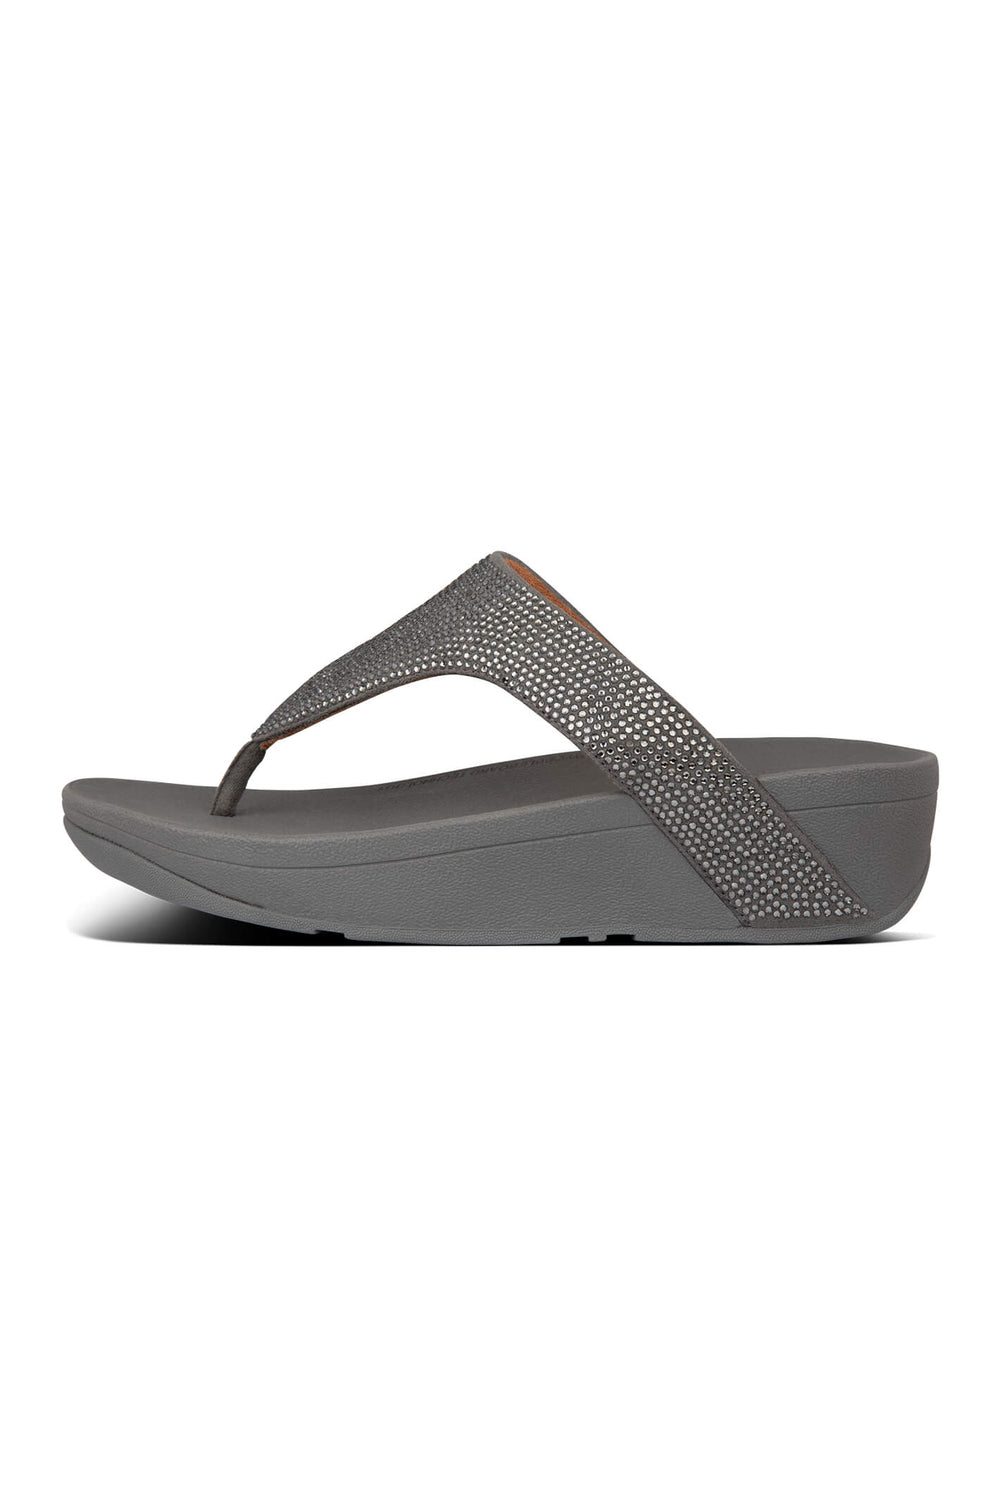 Fitflop Lottie T81 shimmer Crystal Toe-Thong Sandal Pewter 054 - Shirley Allum#colour_pewter-054